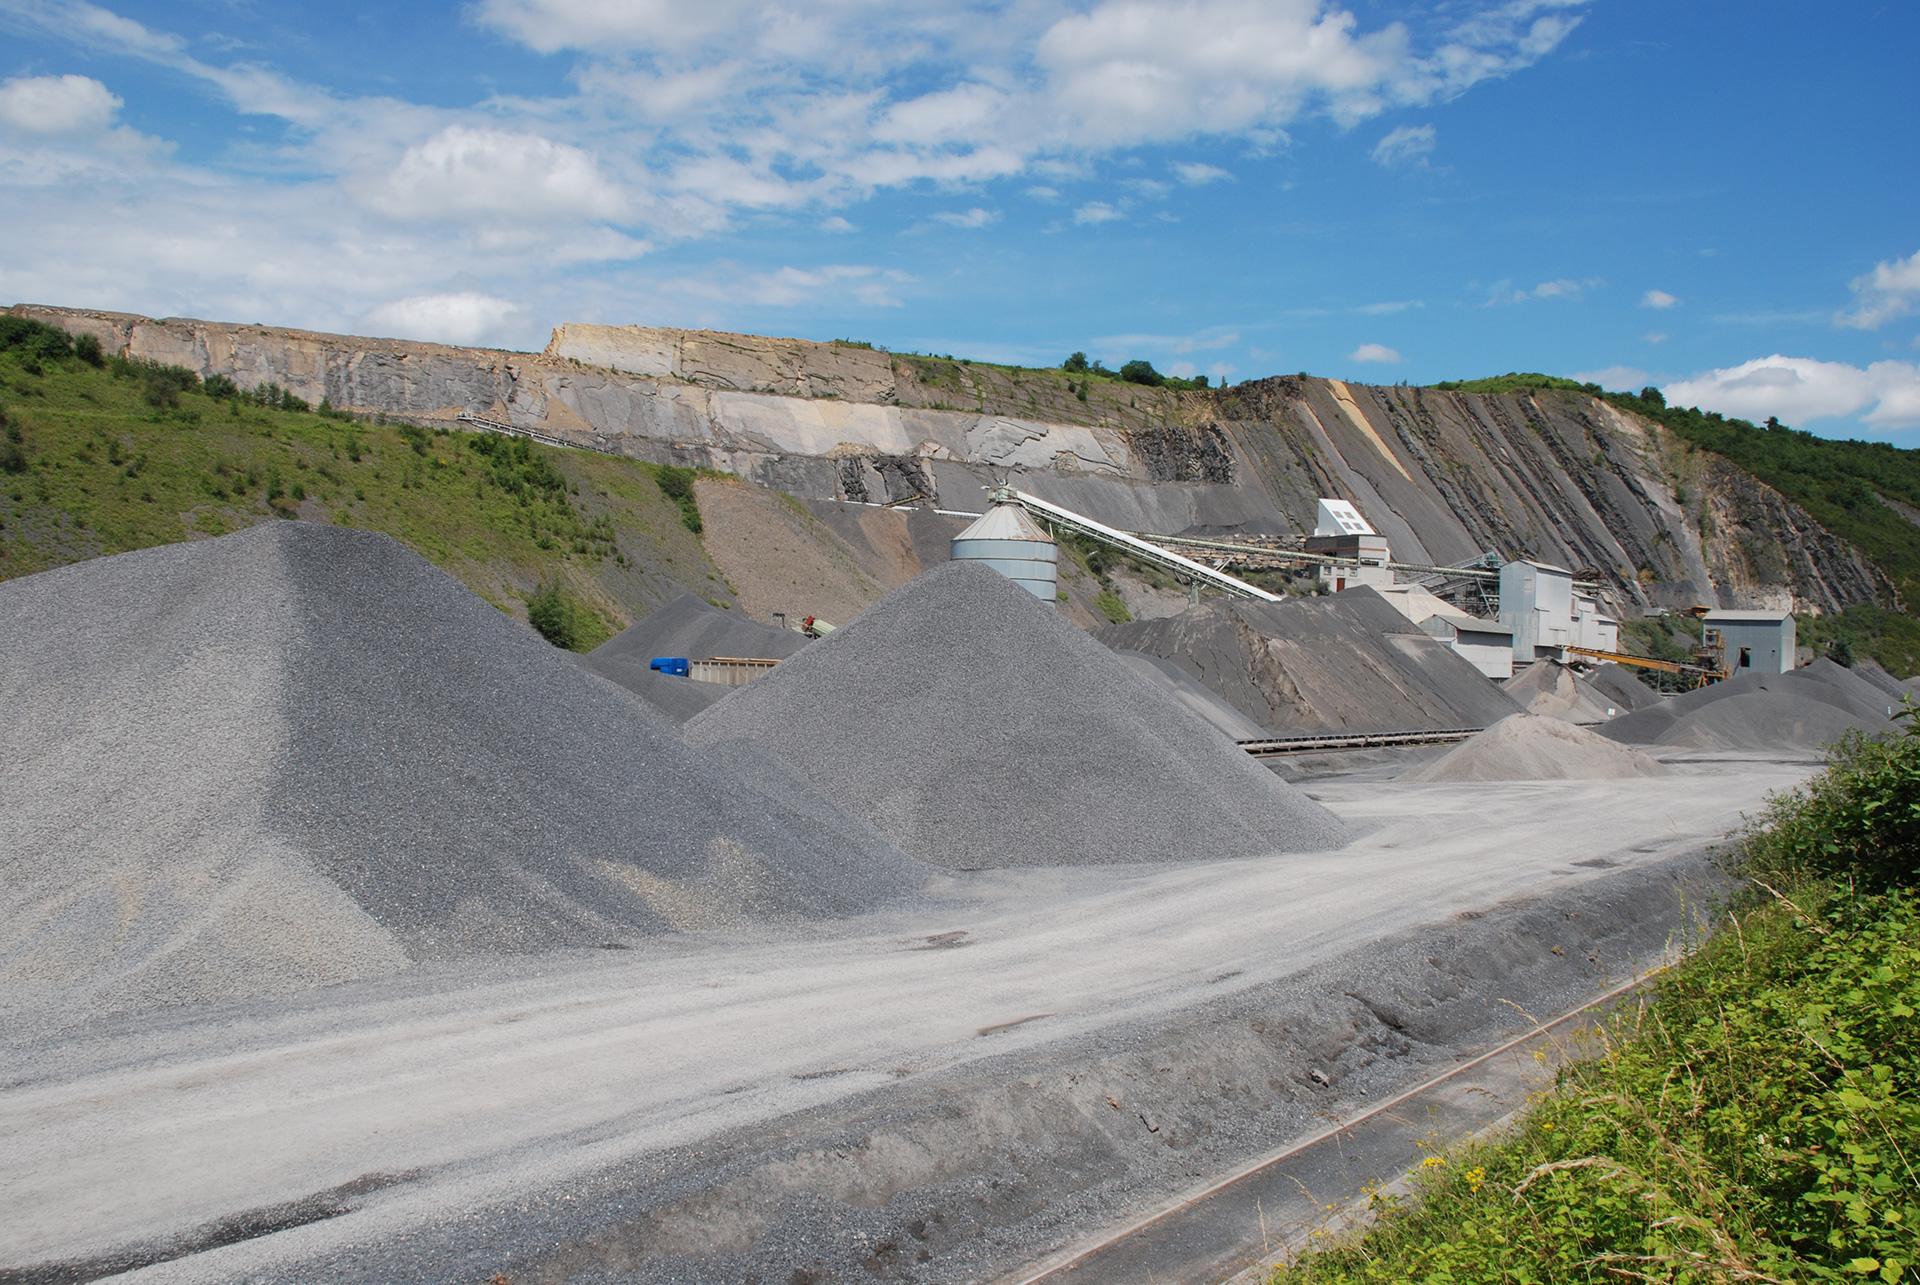 Extraction operations in a large aggregate quarry at the southern end of Givet, Ardennes